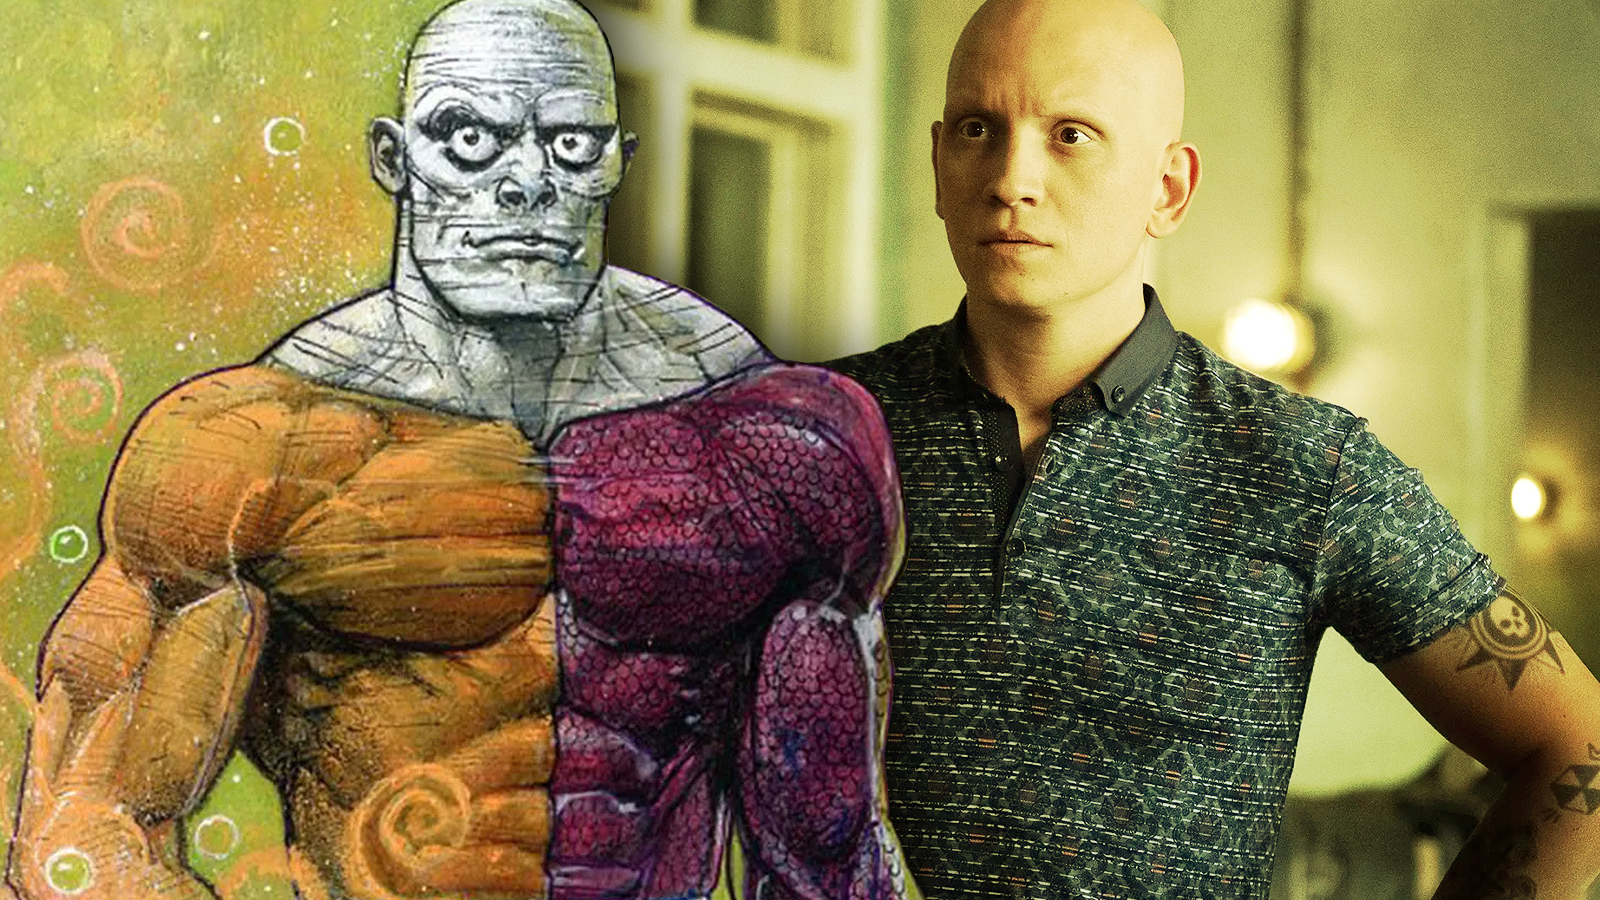 A still of Anthony Carrigan in Barry combined with DC comics artwork of Metamorpho